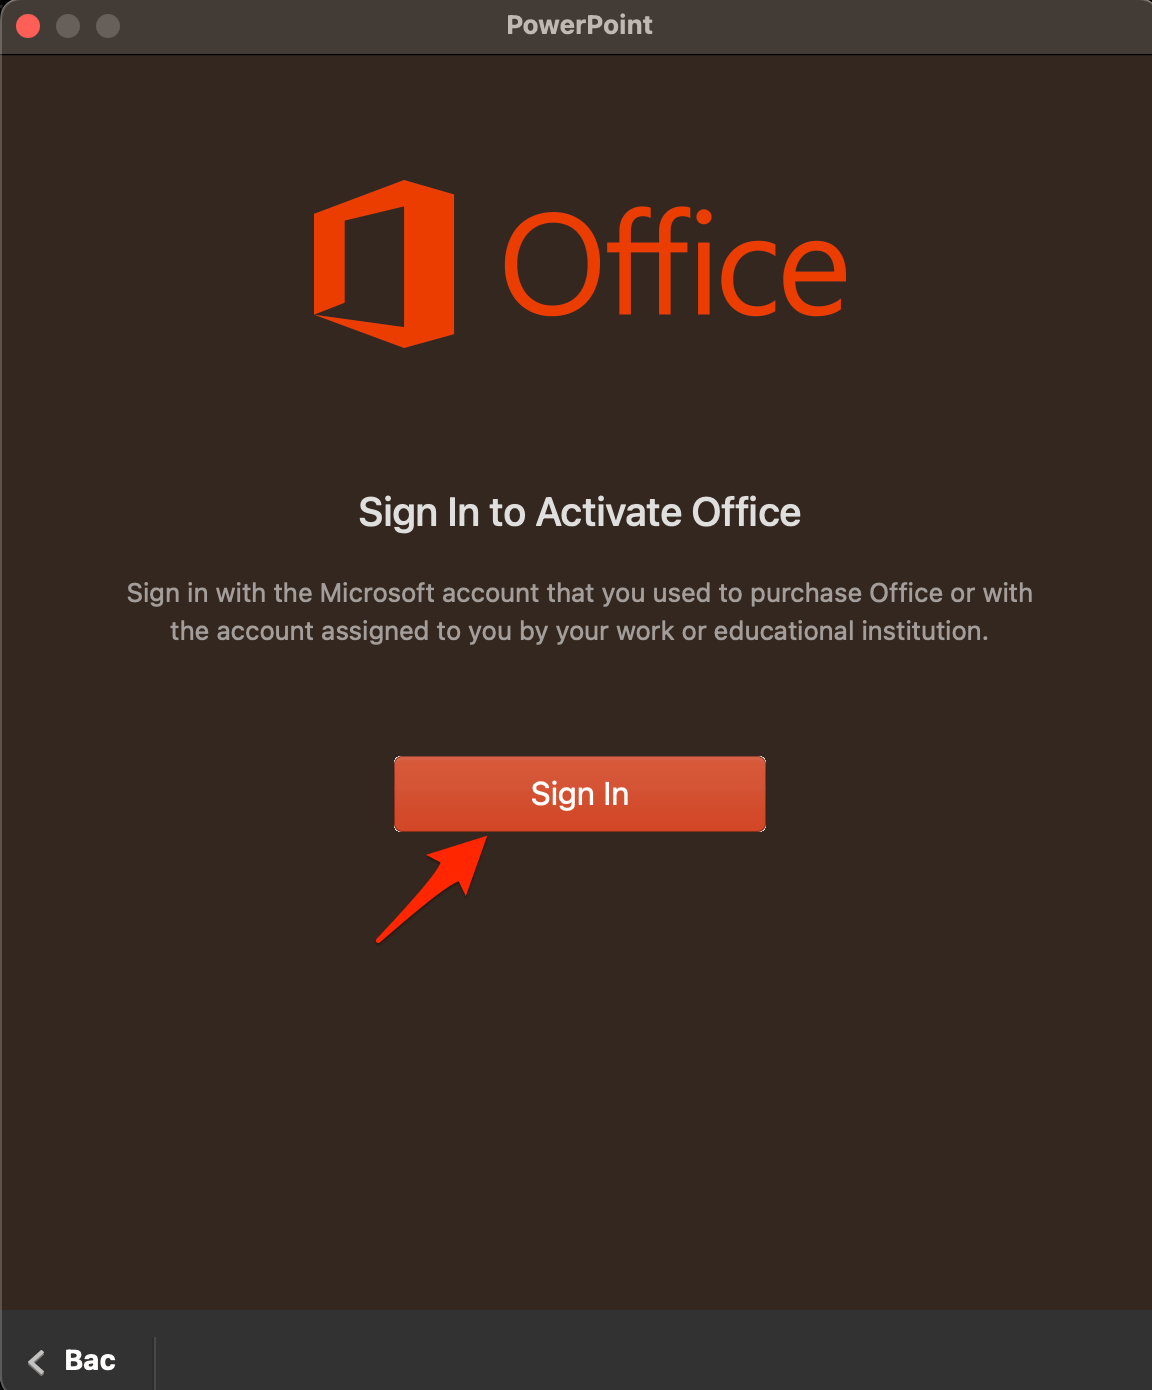 sign in with your Microsoft account